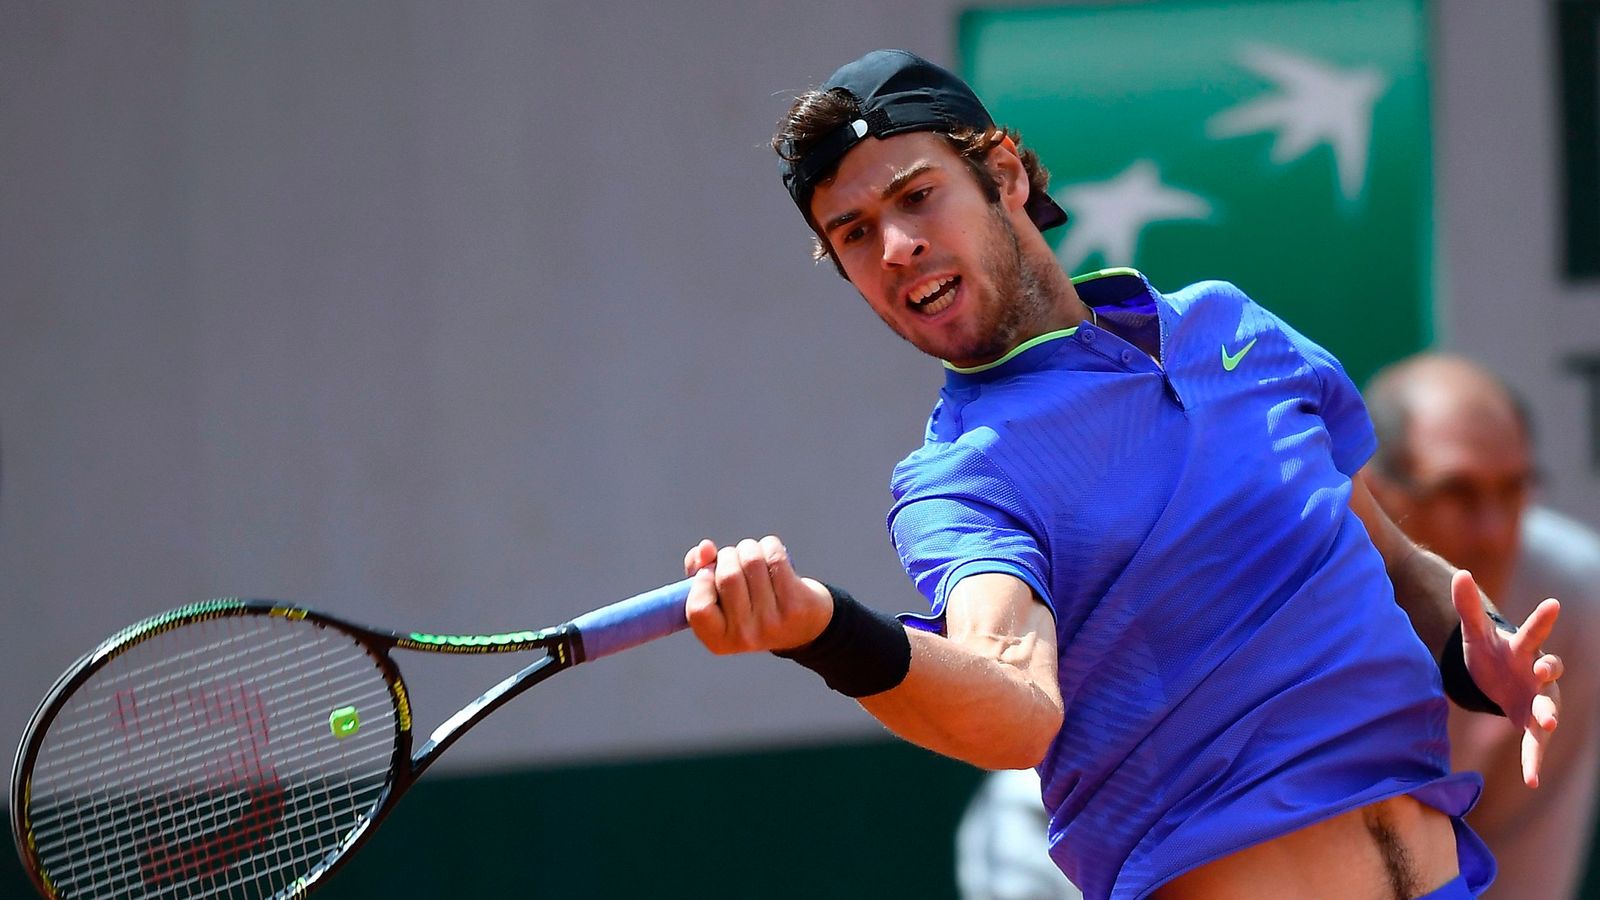 French Open: Karen Khachanov to face Andy Murray after beating John Isner | Tennis News | Sky Sports